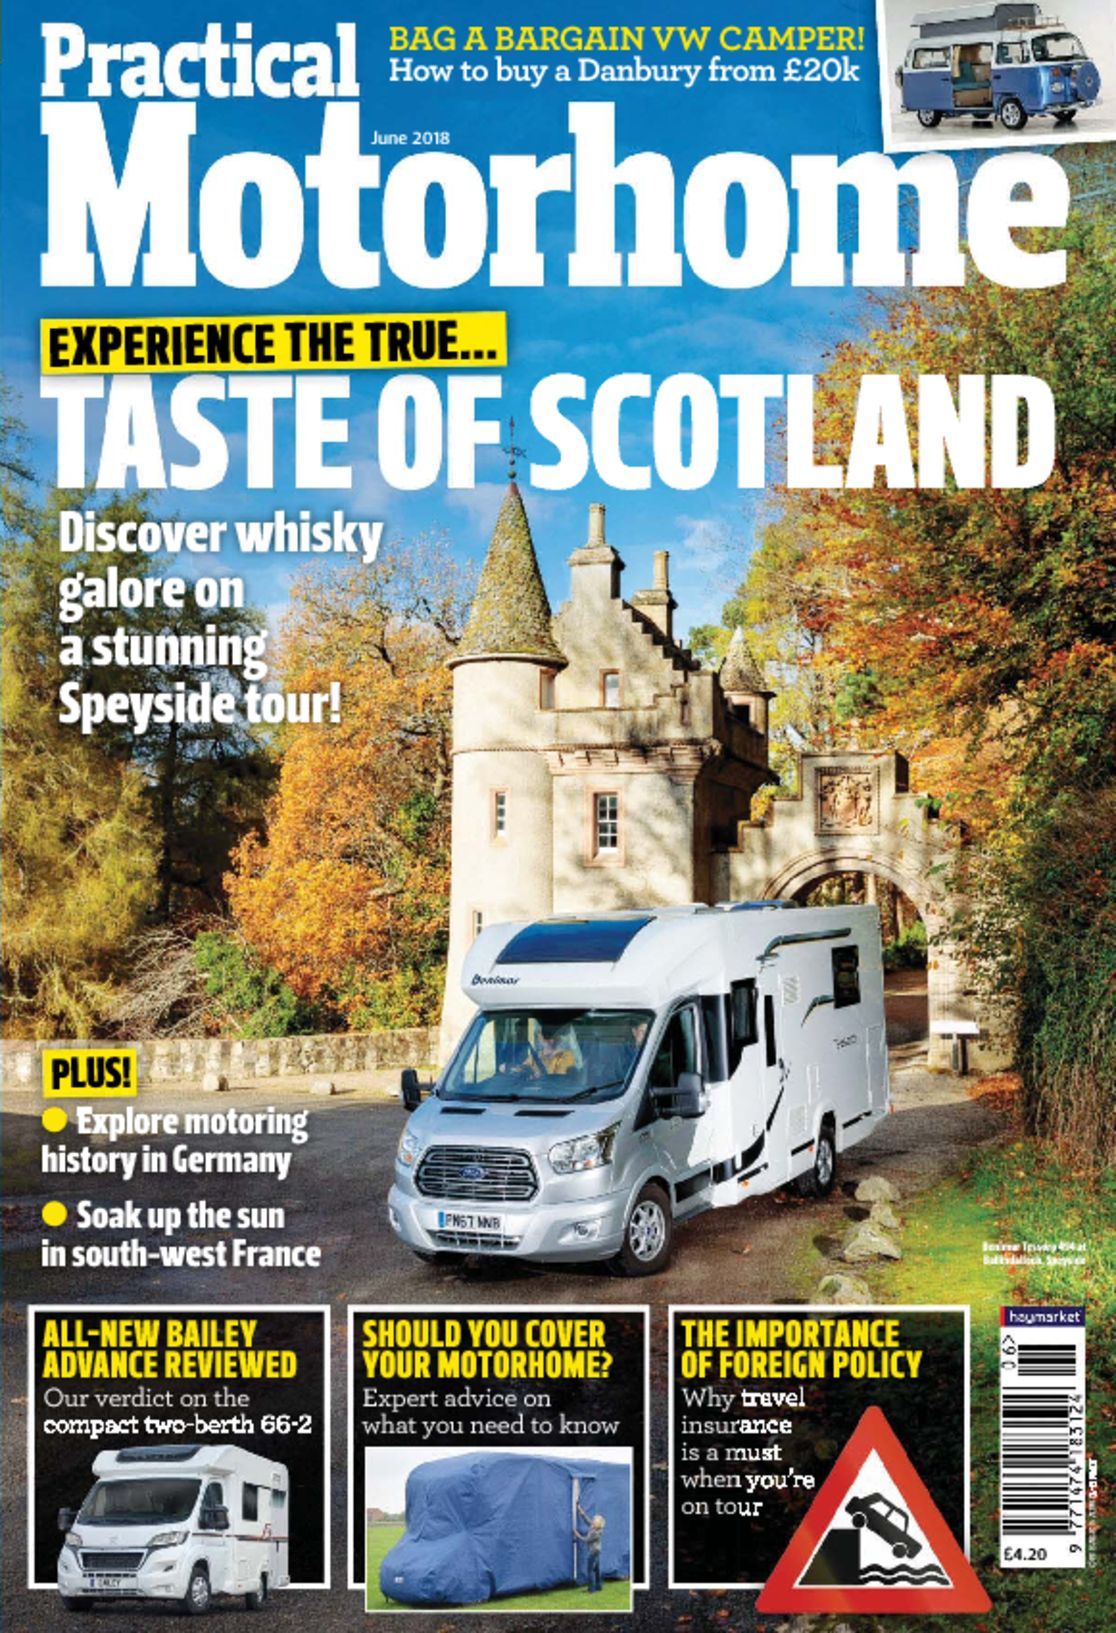 Motorhome Magazine Issues 2011 and 2012 for RV Travel 